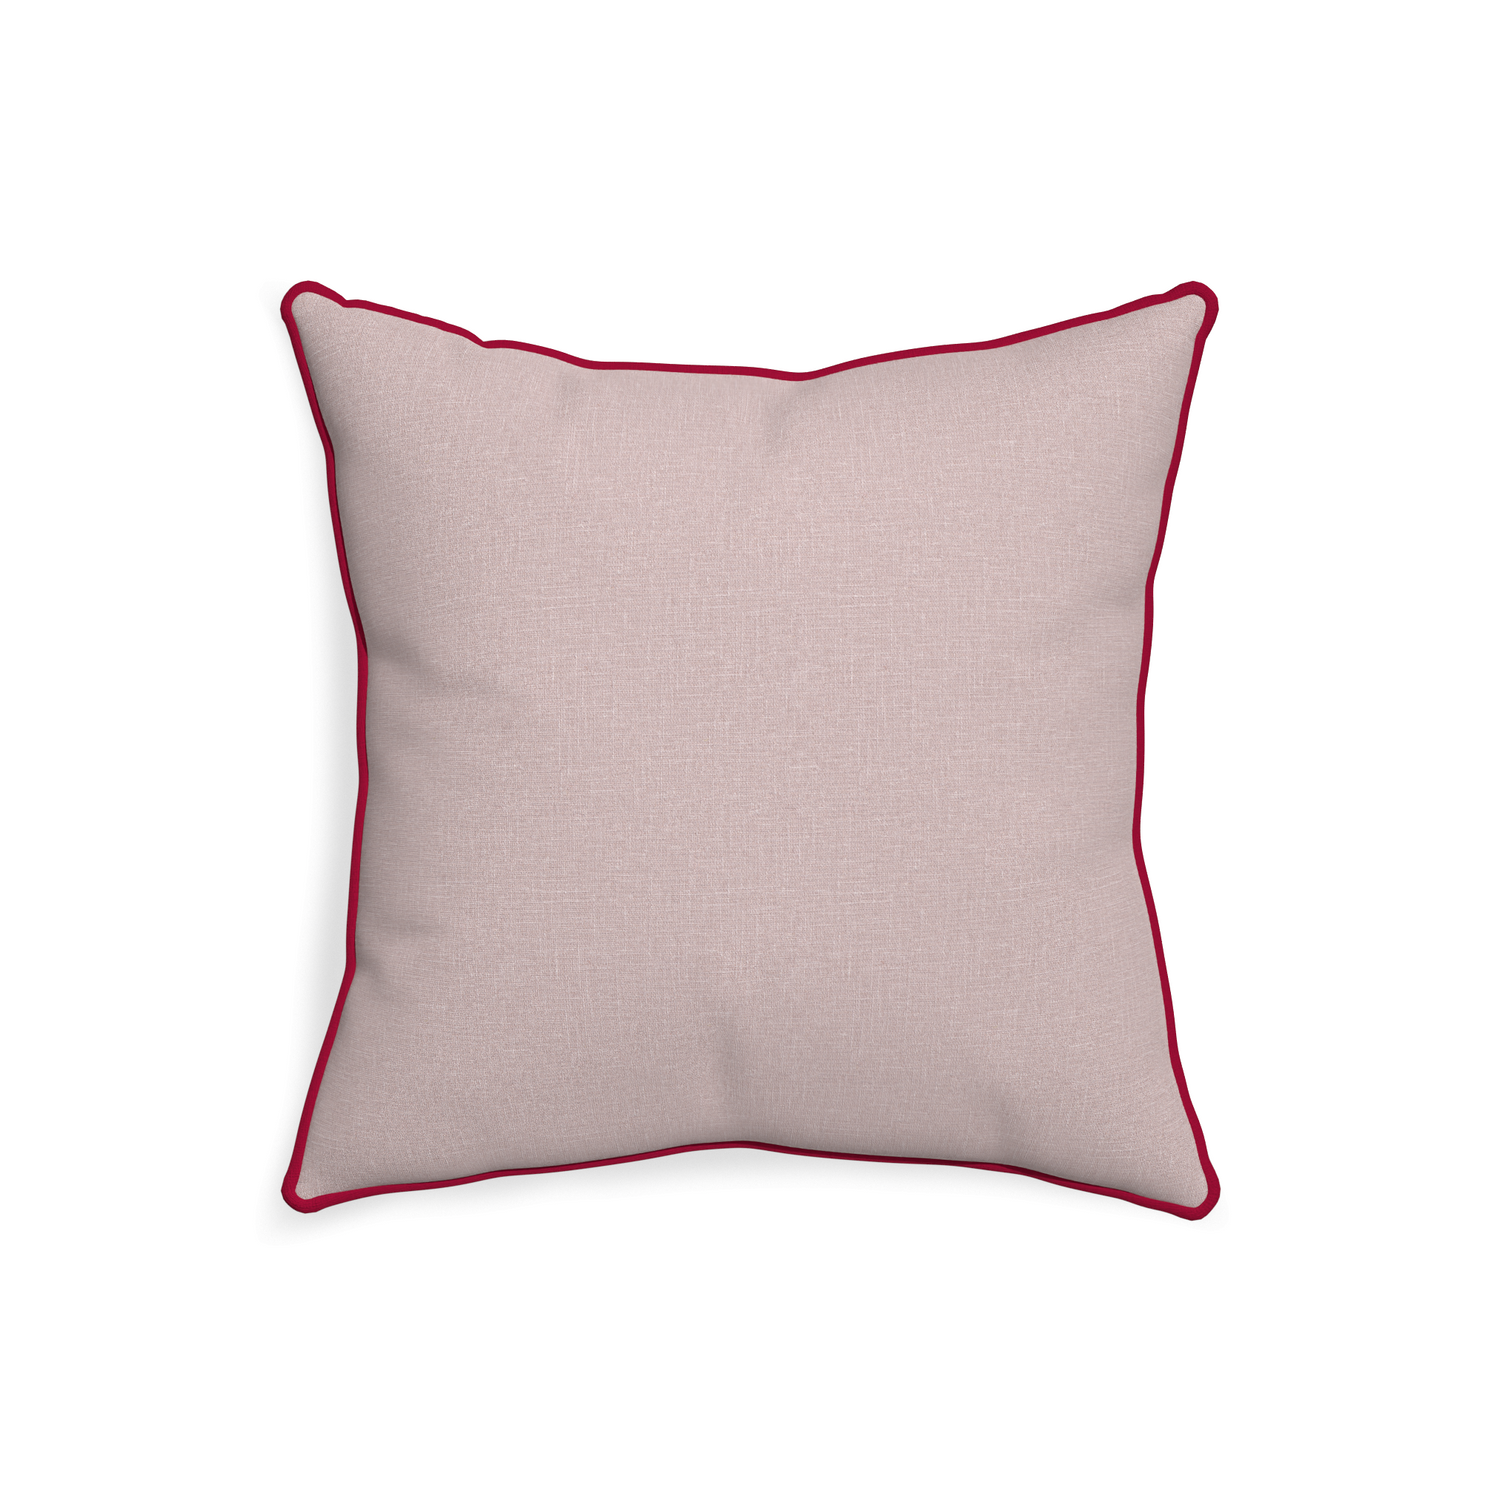 20-square orchid custom mauve pinkpillow with raspberry piping on white background